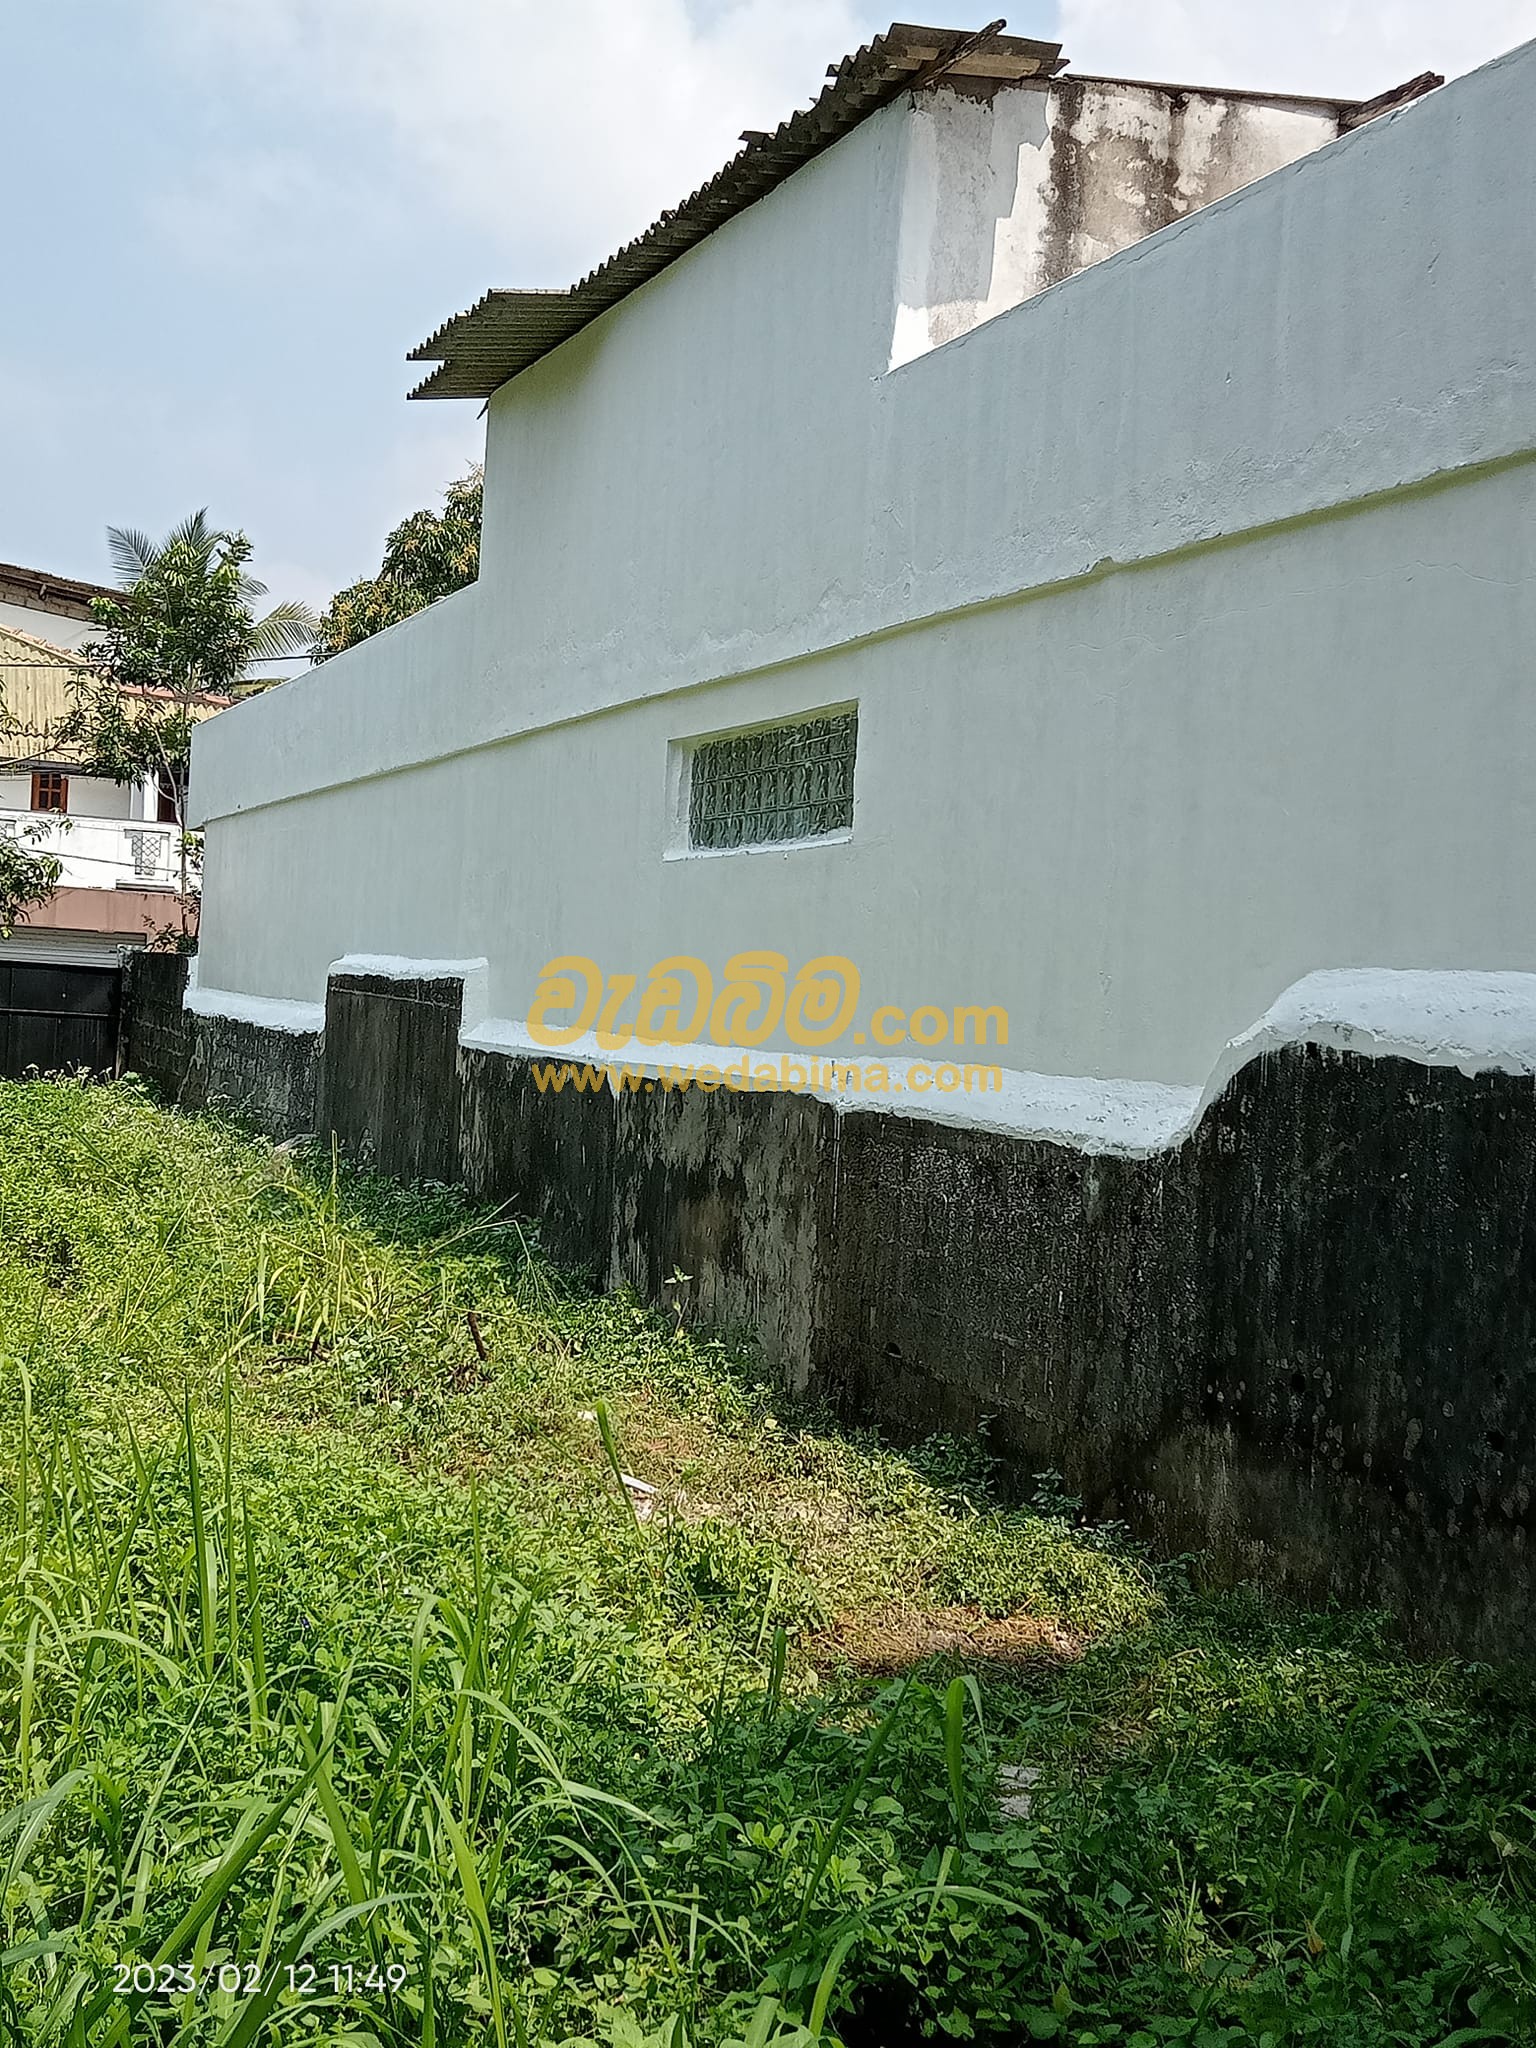 Cover image for wall waterproofing price in sri lanka